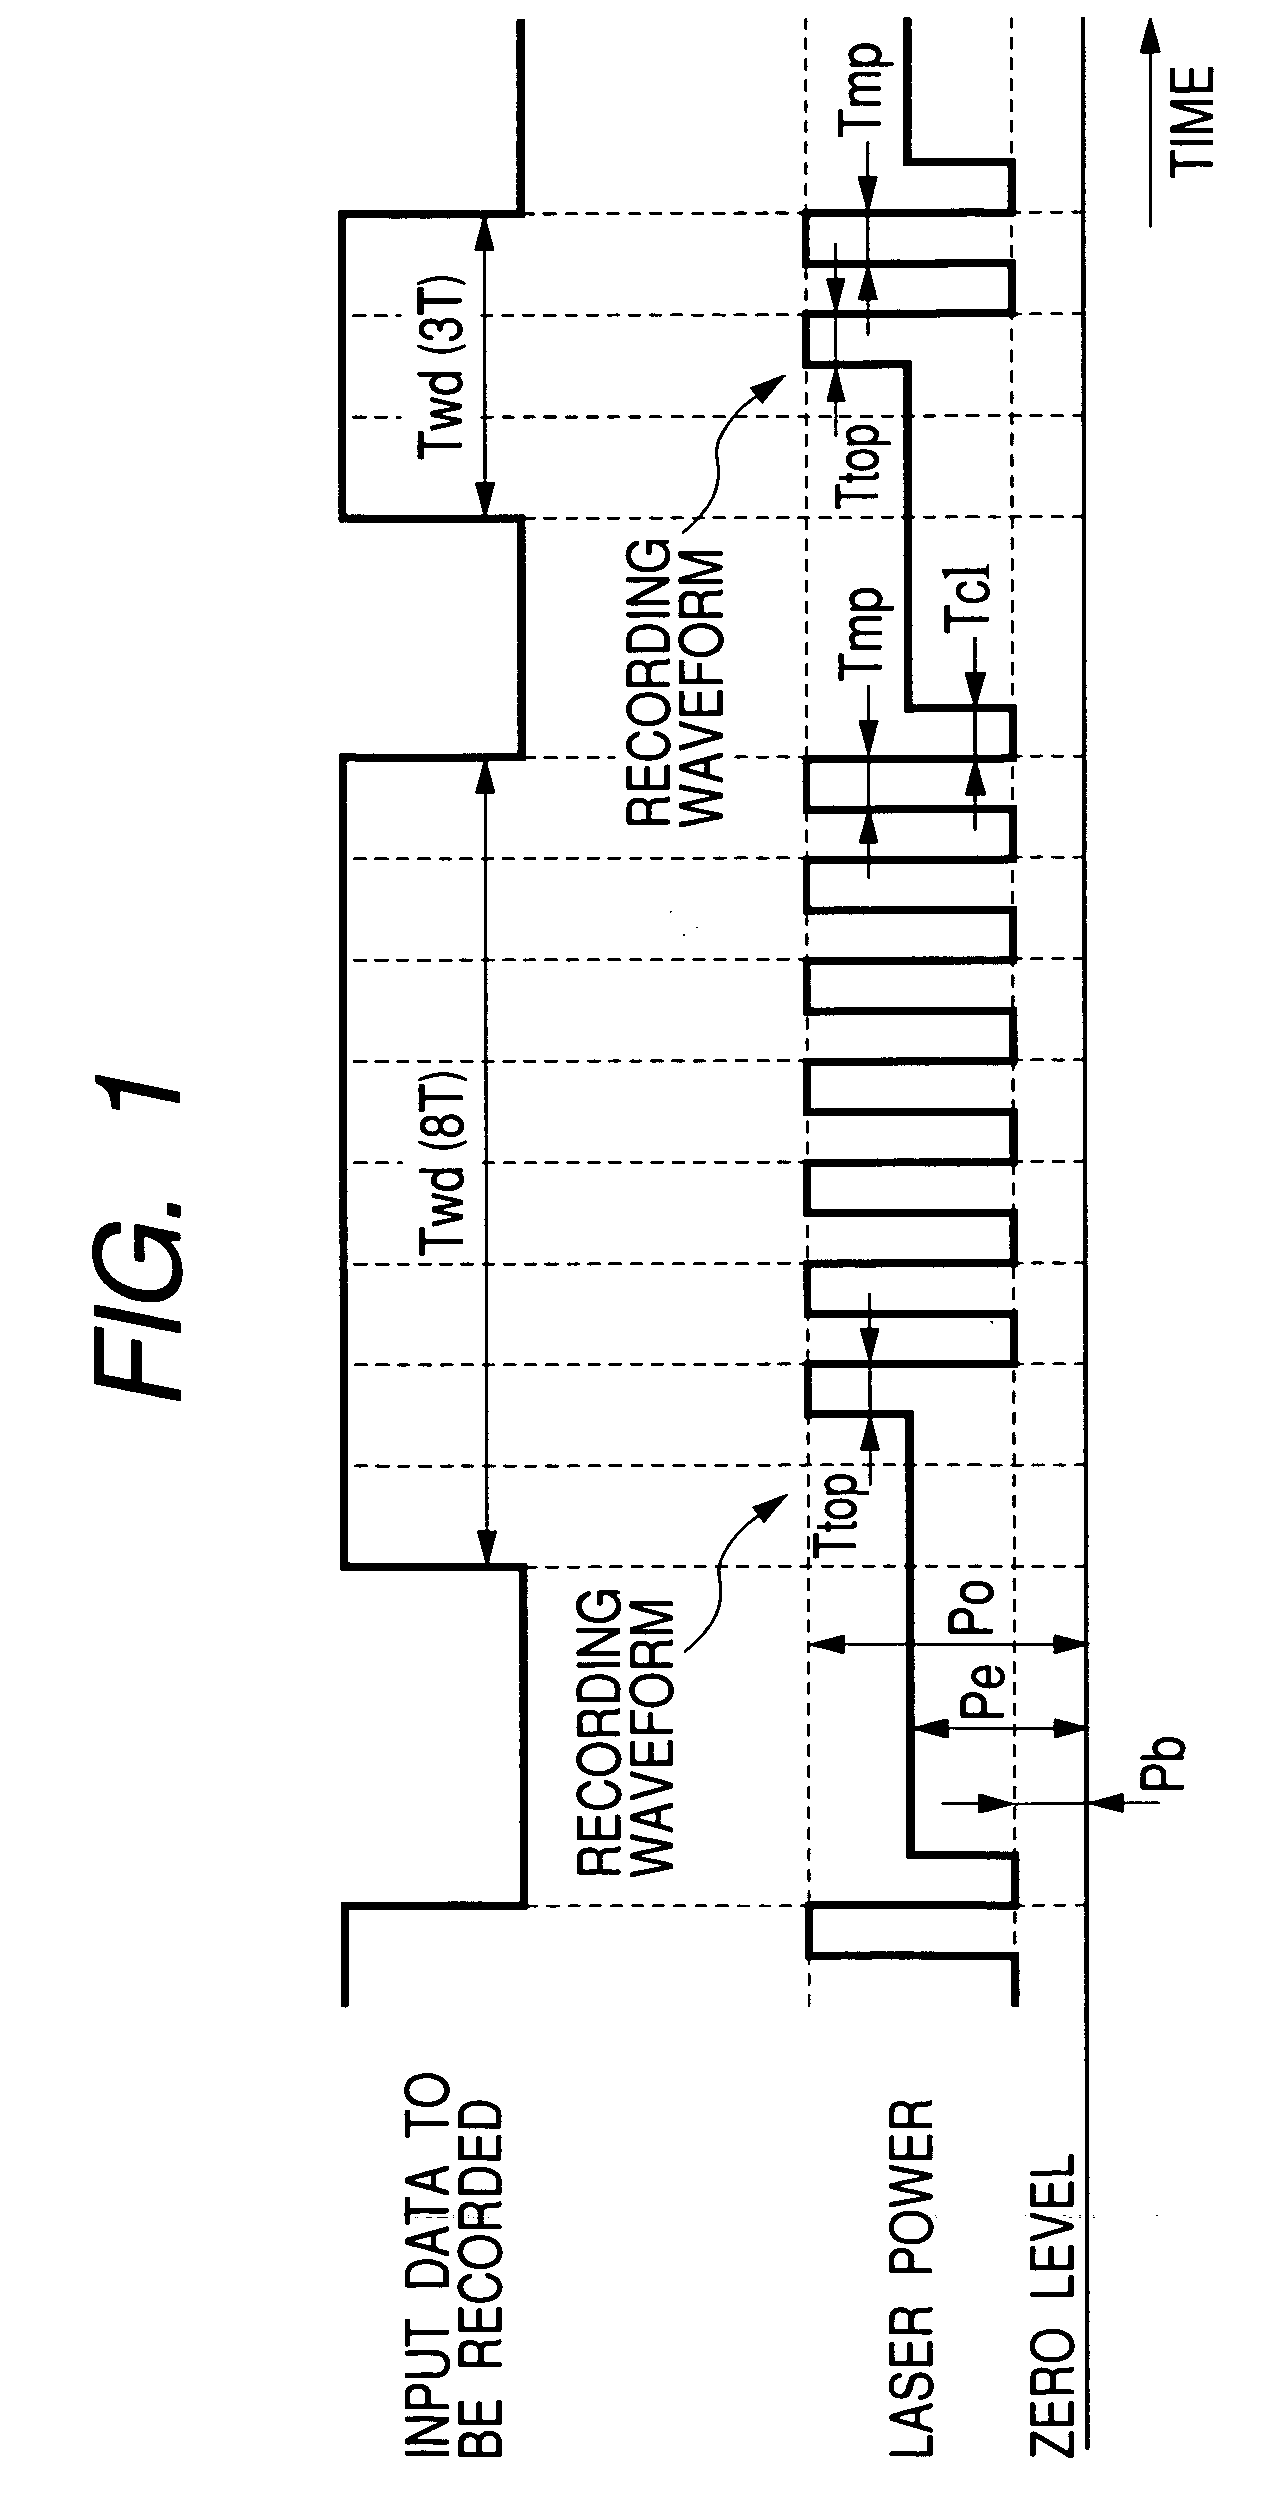 Optical disk adaptable to record at high disk scanning speed, and related apparatus and method